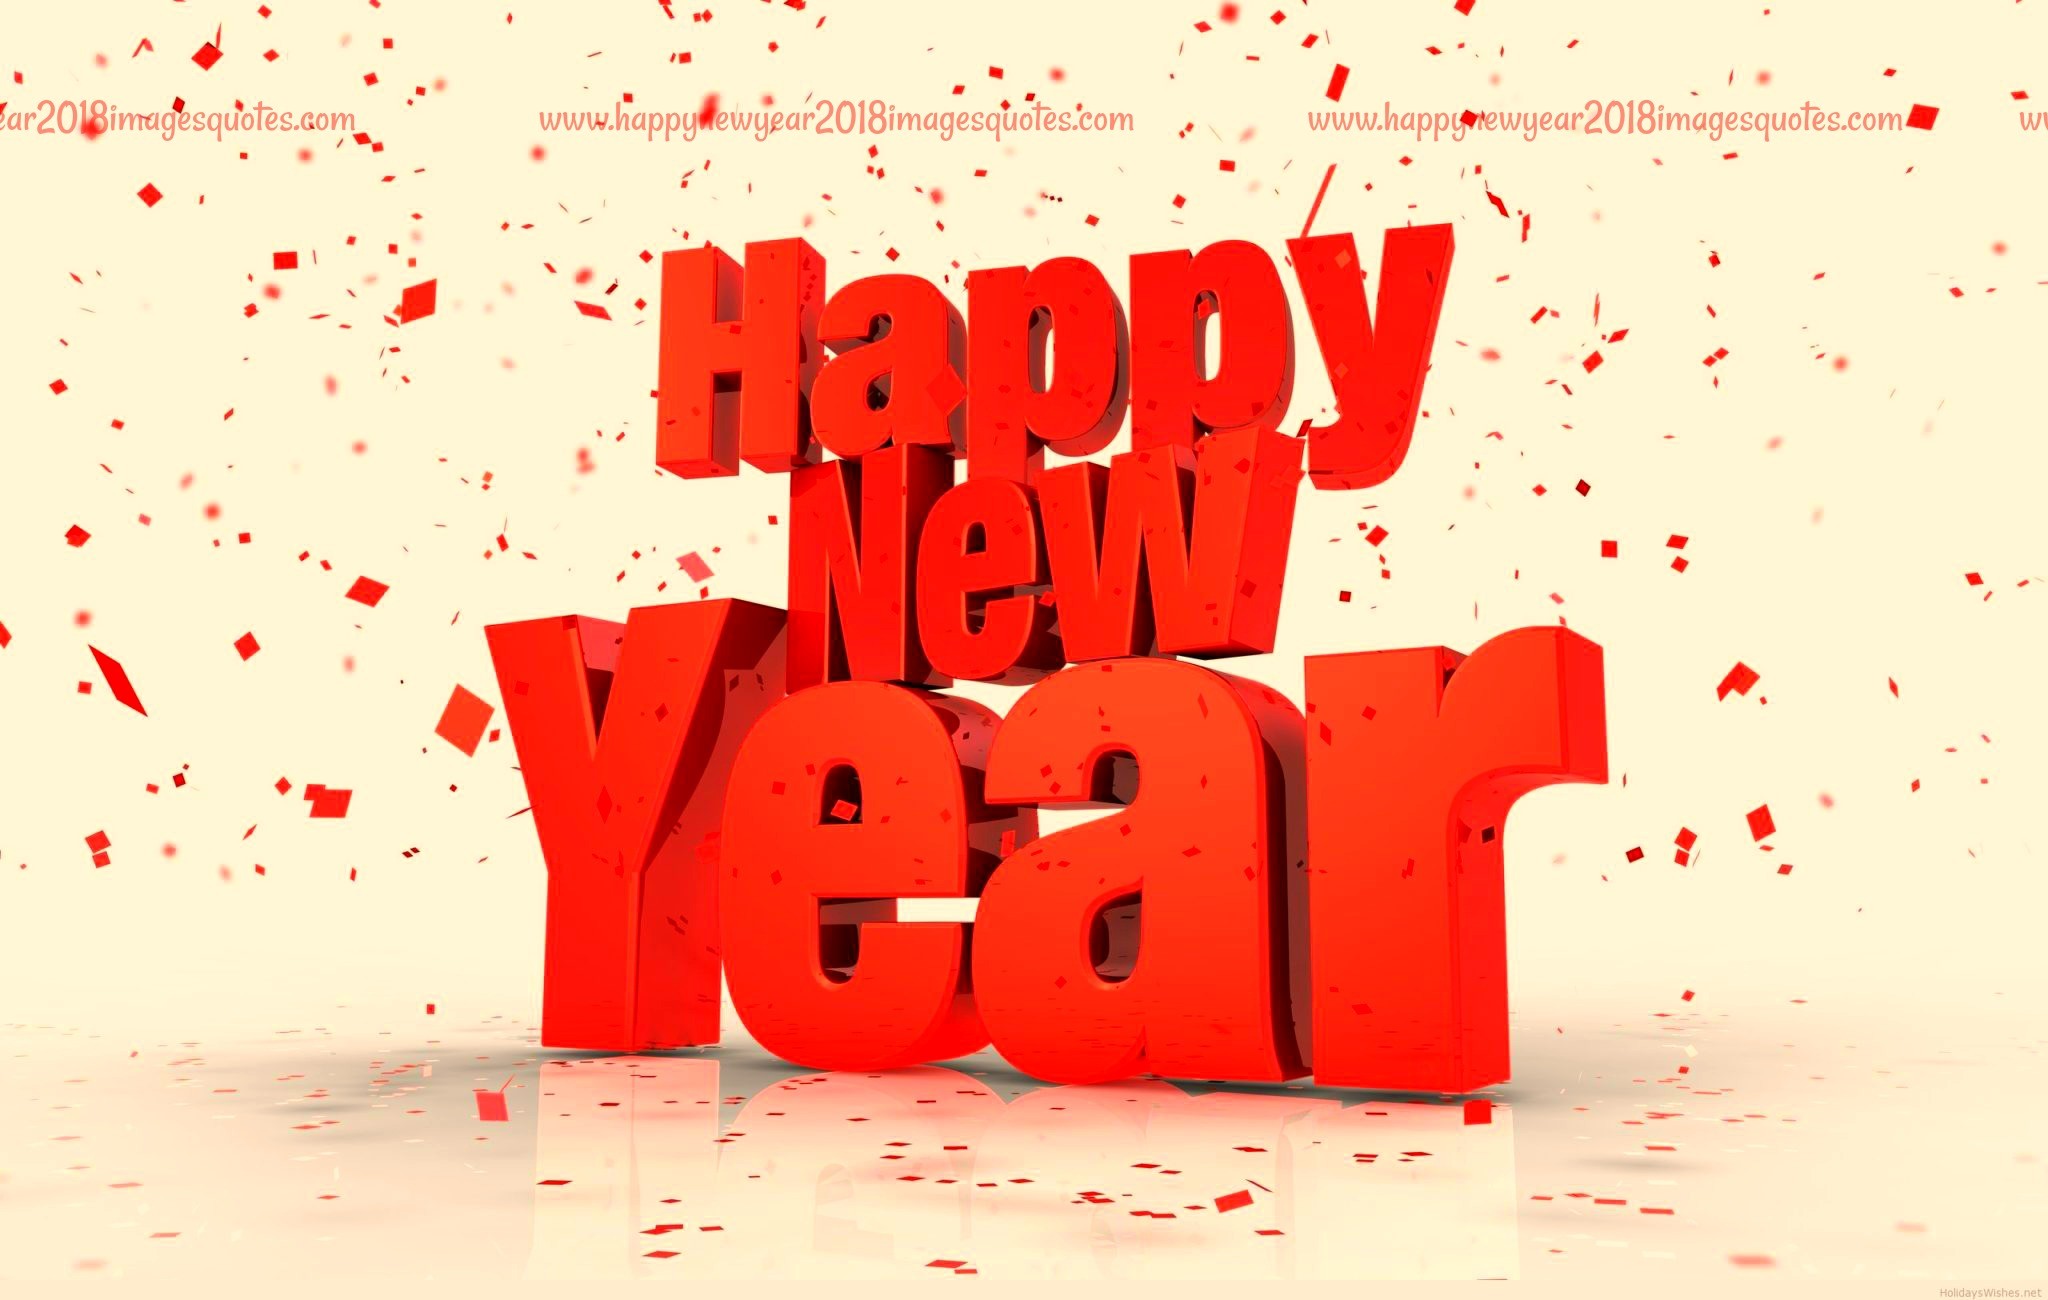 2048x1300 Tags:2018 happy new year pictures, 2018 new year pictures, happy new year  pictures 2018, new year 2018 pictures, new year pictures 2018, picture happy  new ...